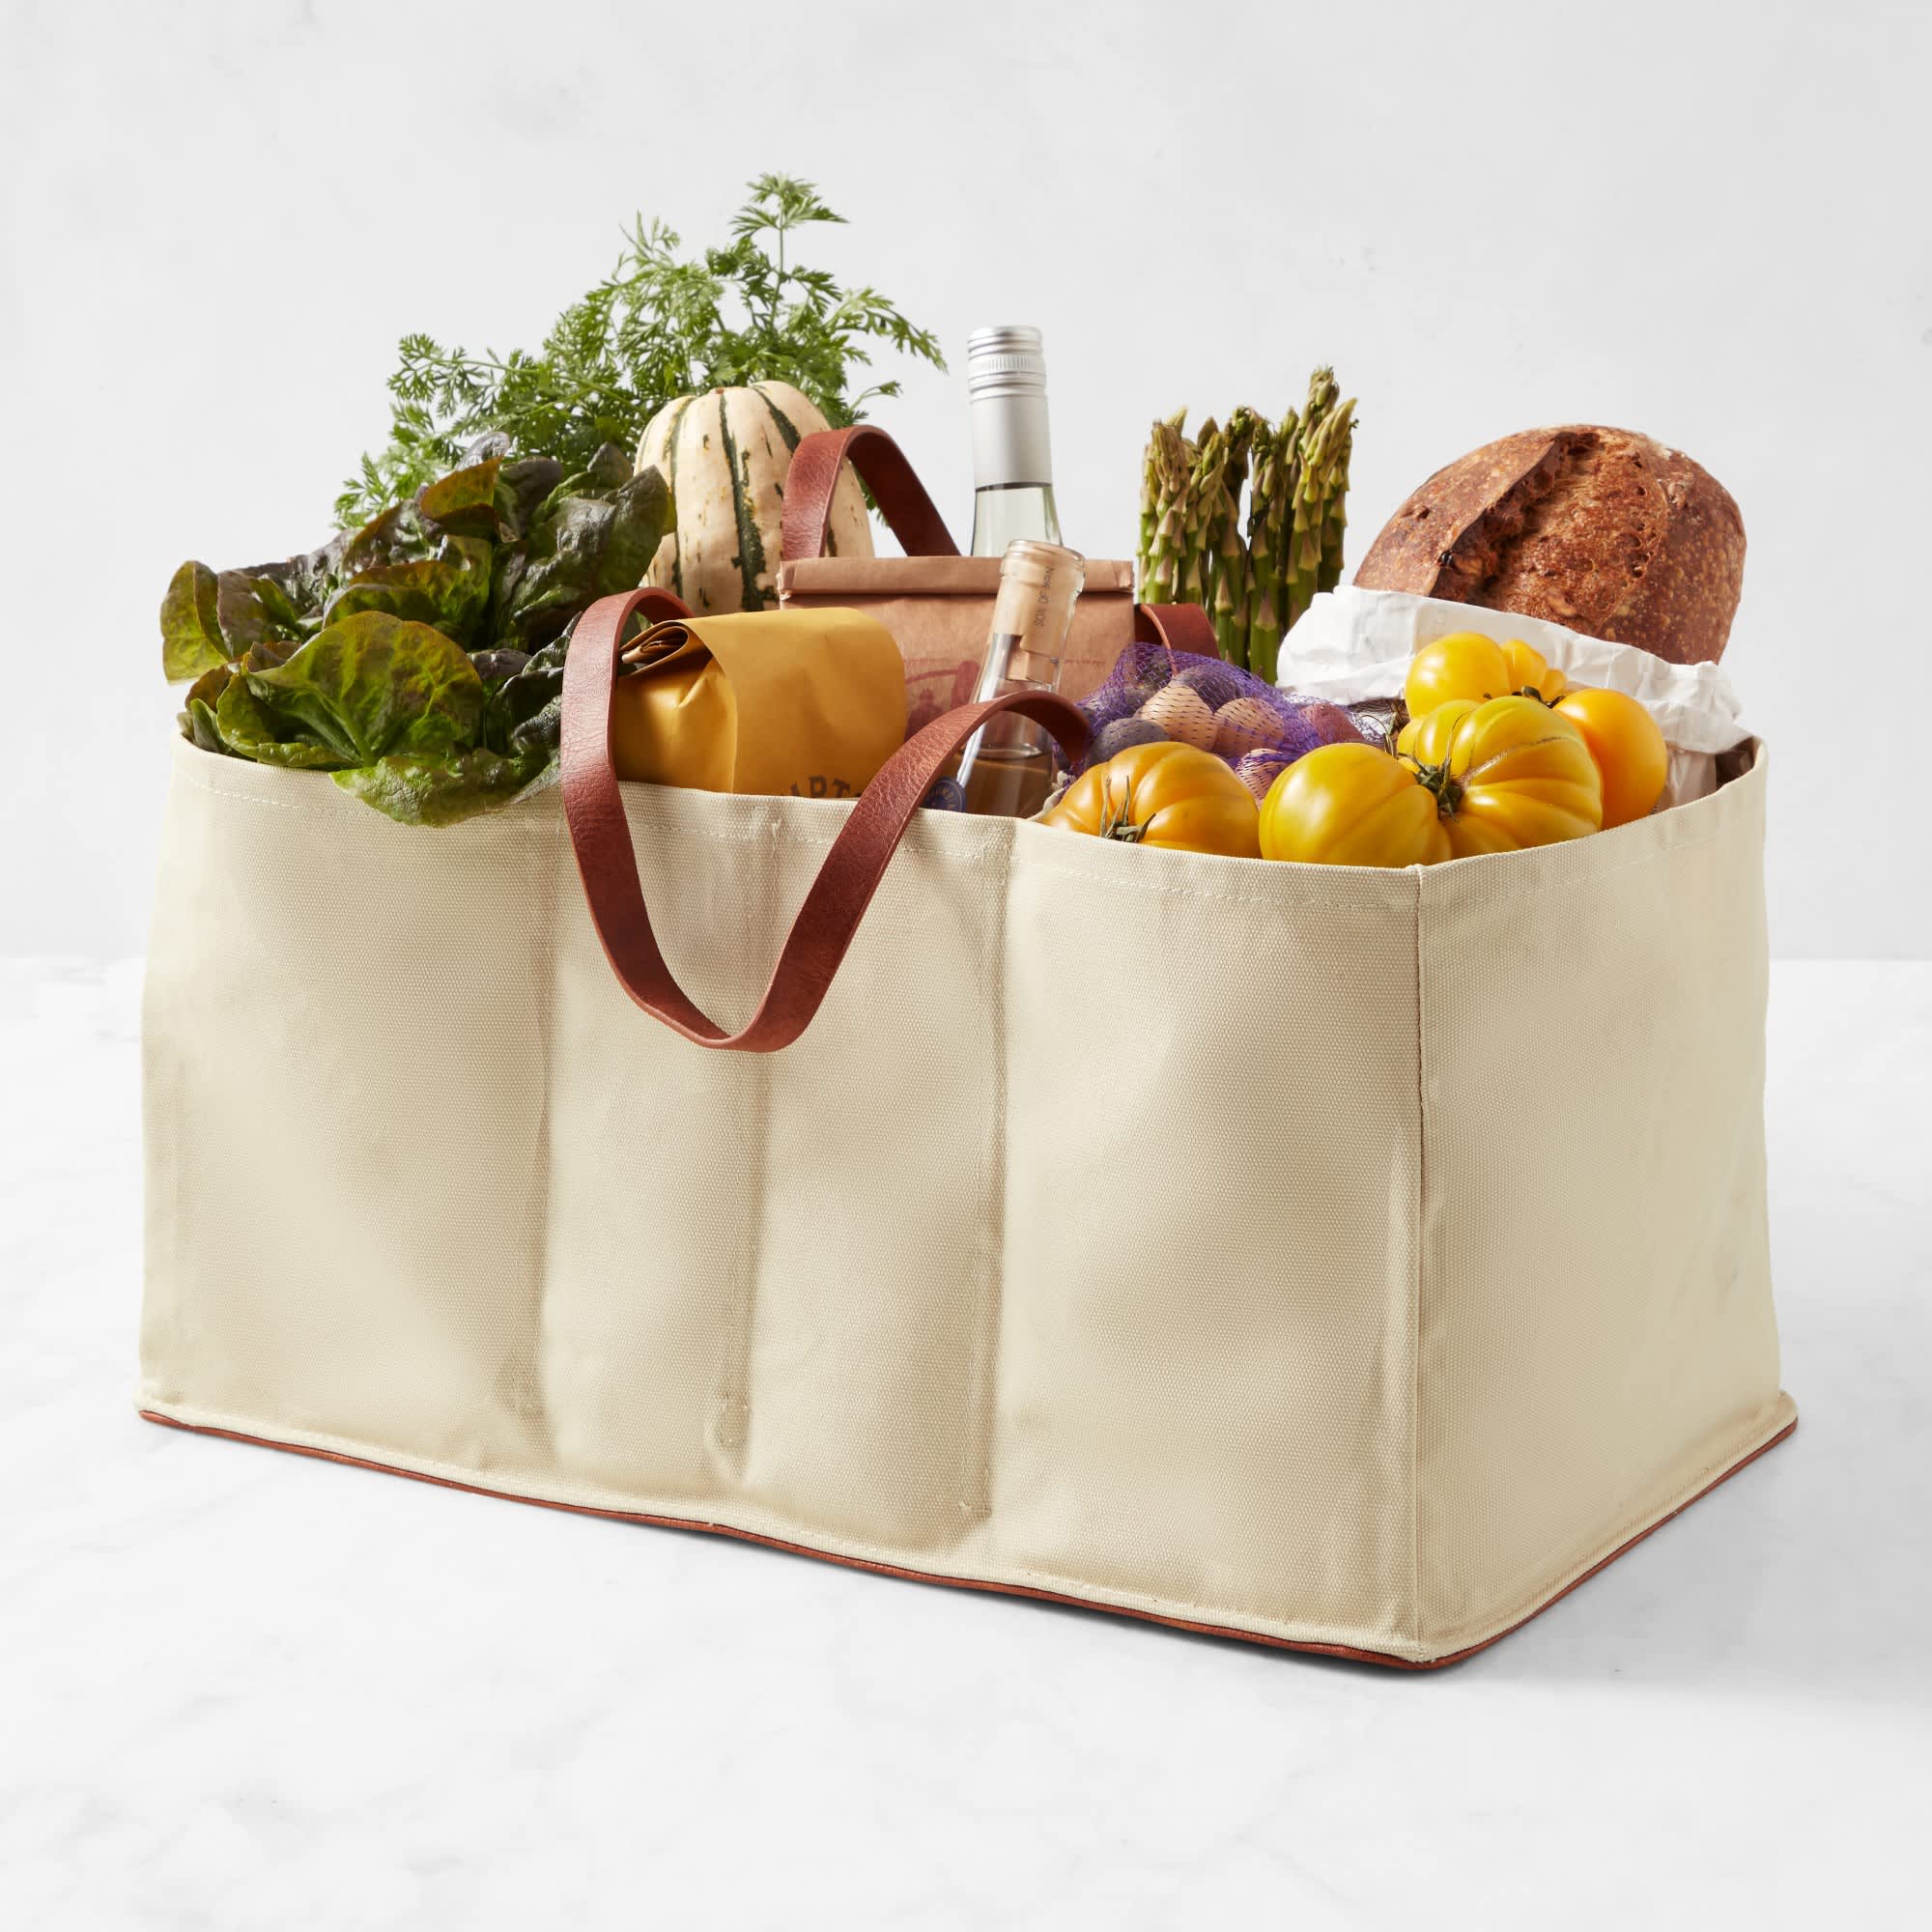 http://cdn.apartmenttherapy.info/image/upload/v1678907473/commerce/grocery-tote-williams-sonoma.jpg